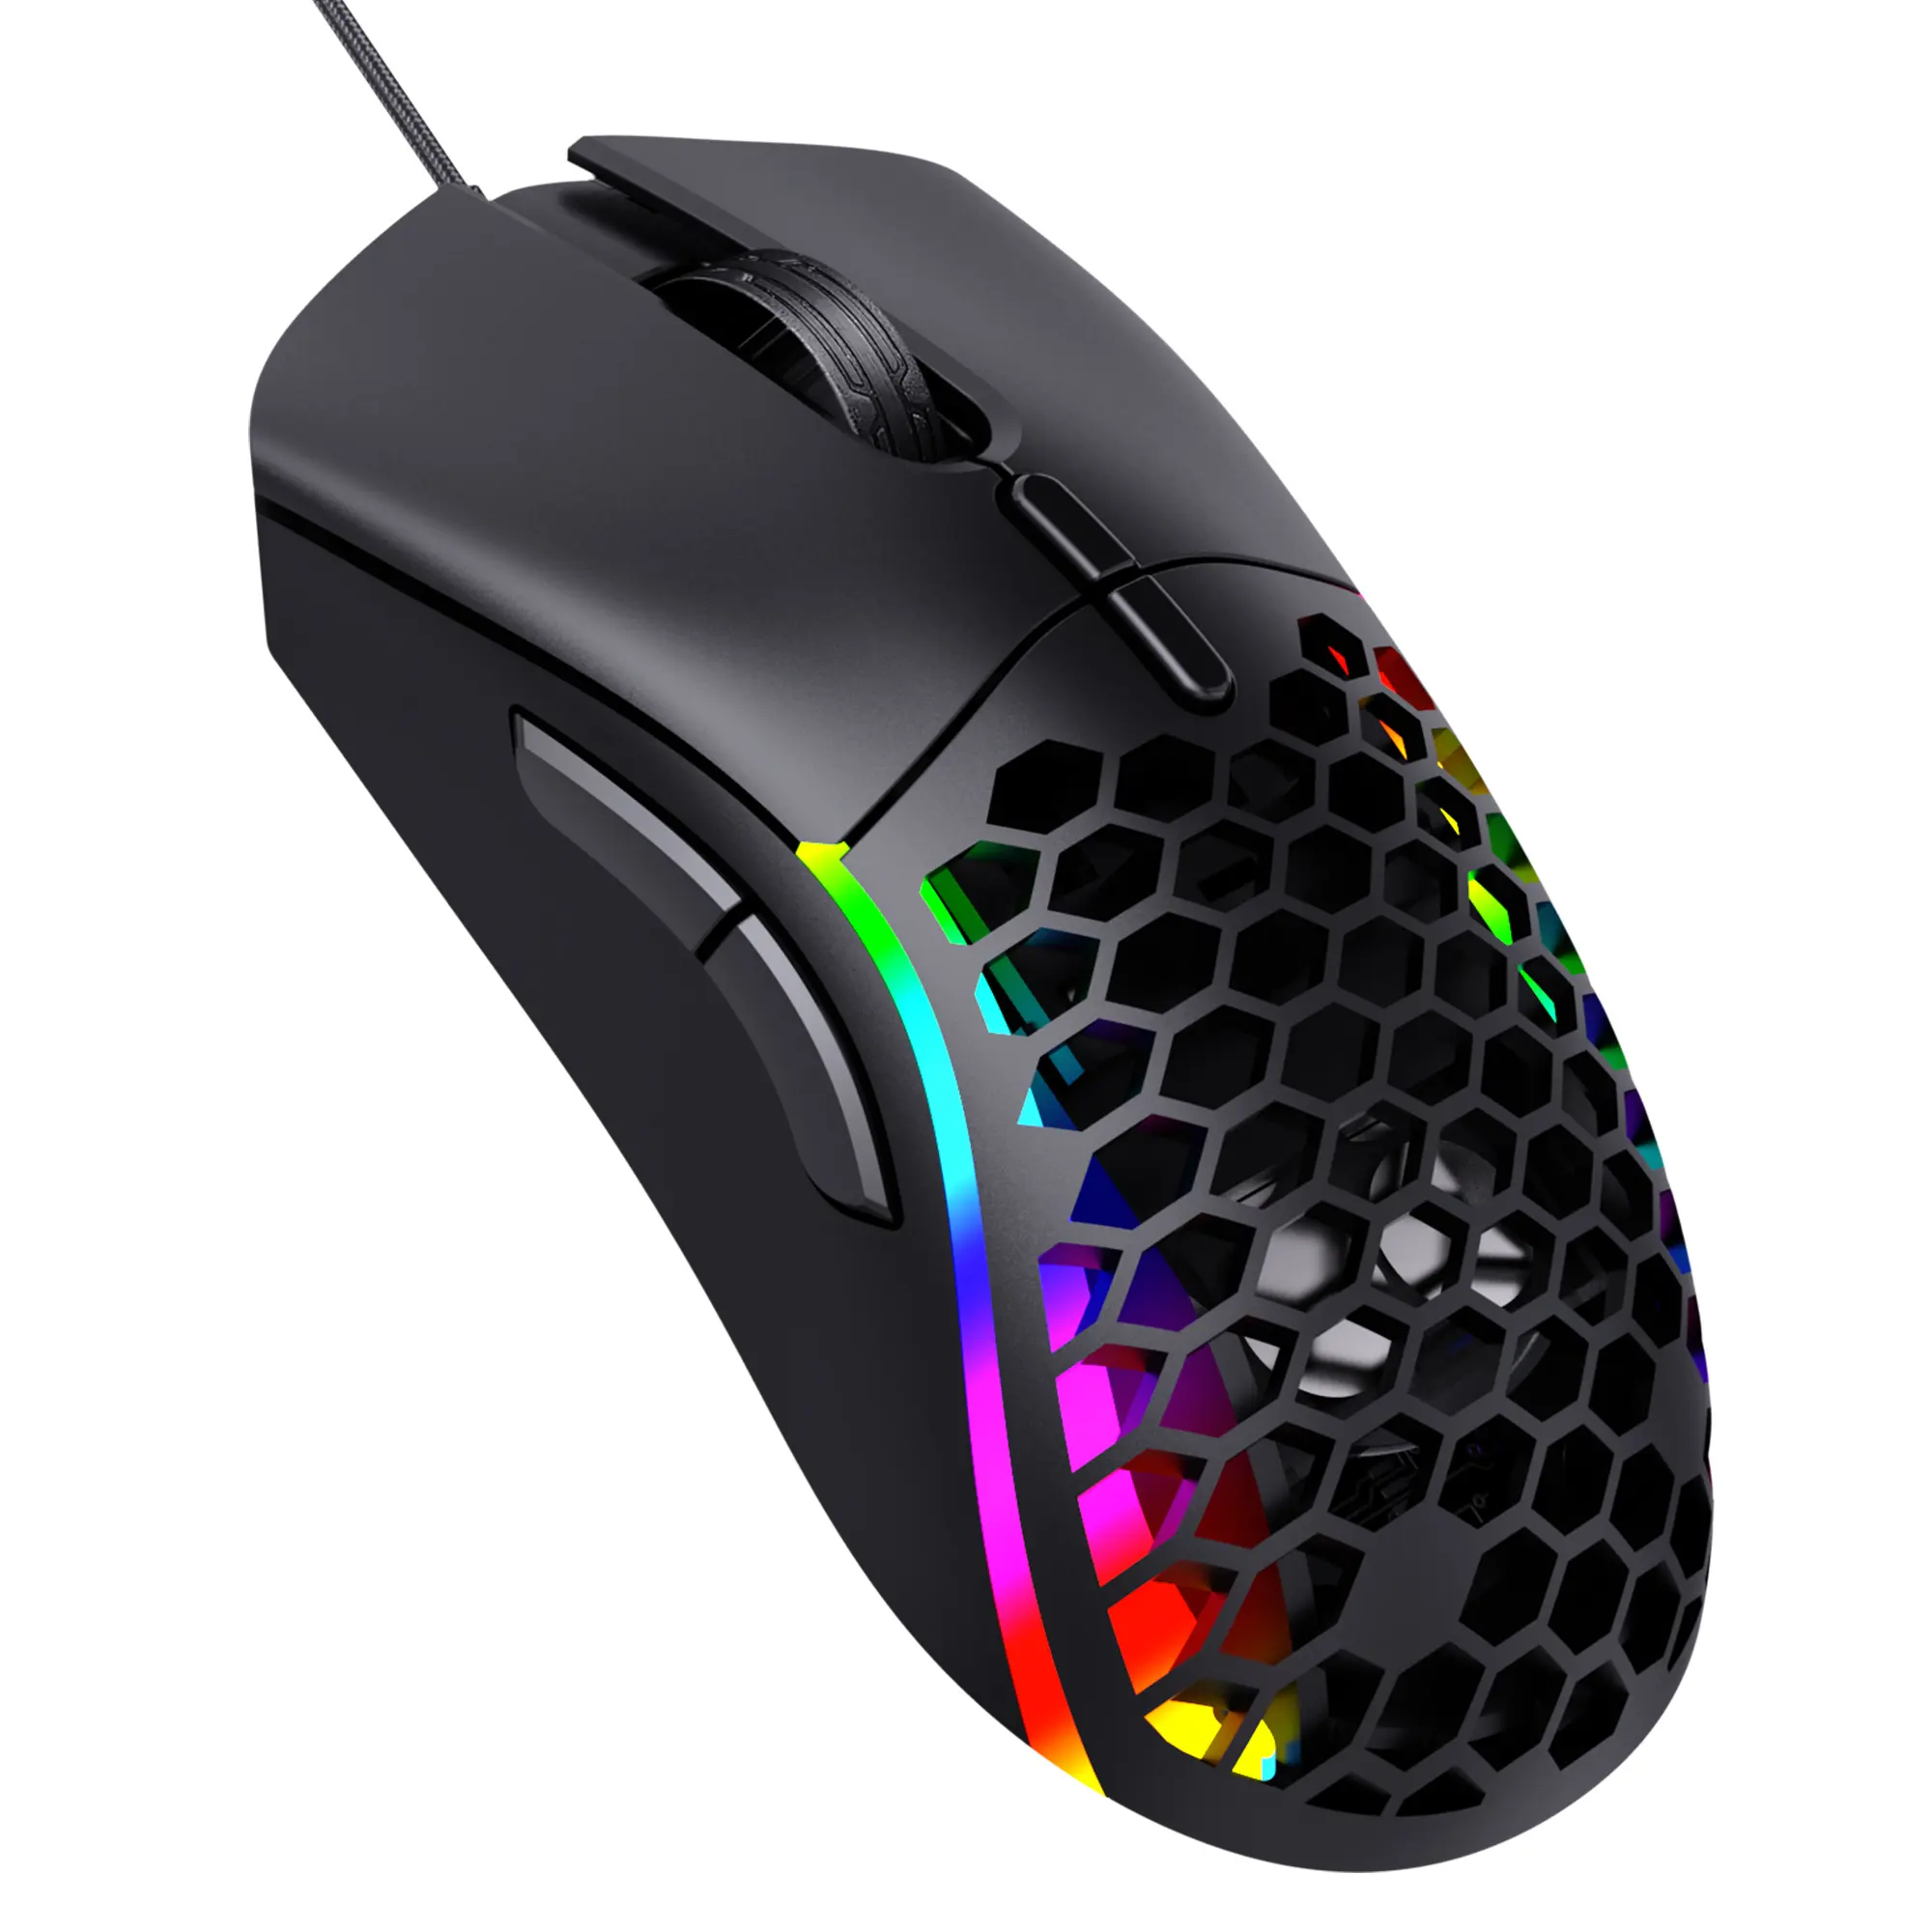 2022 gaming mouse best buy quietest gaming mouse with side buttons